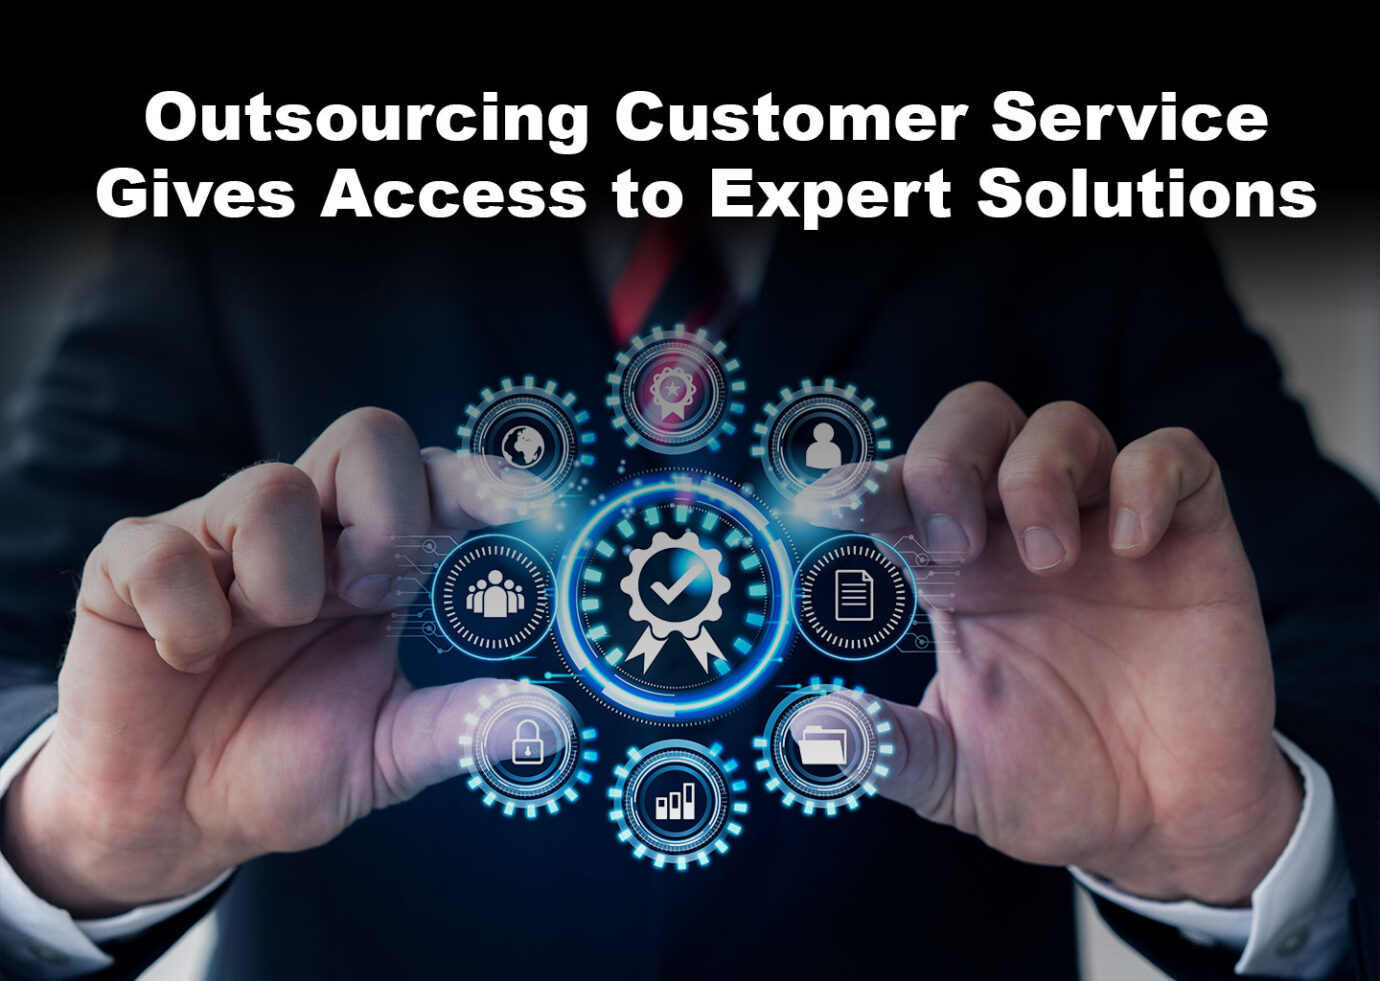 Outsourcing Customer Service Gives Access to Expert Solutions